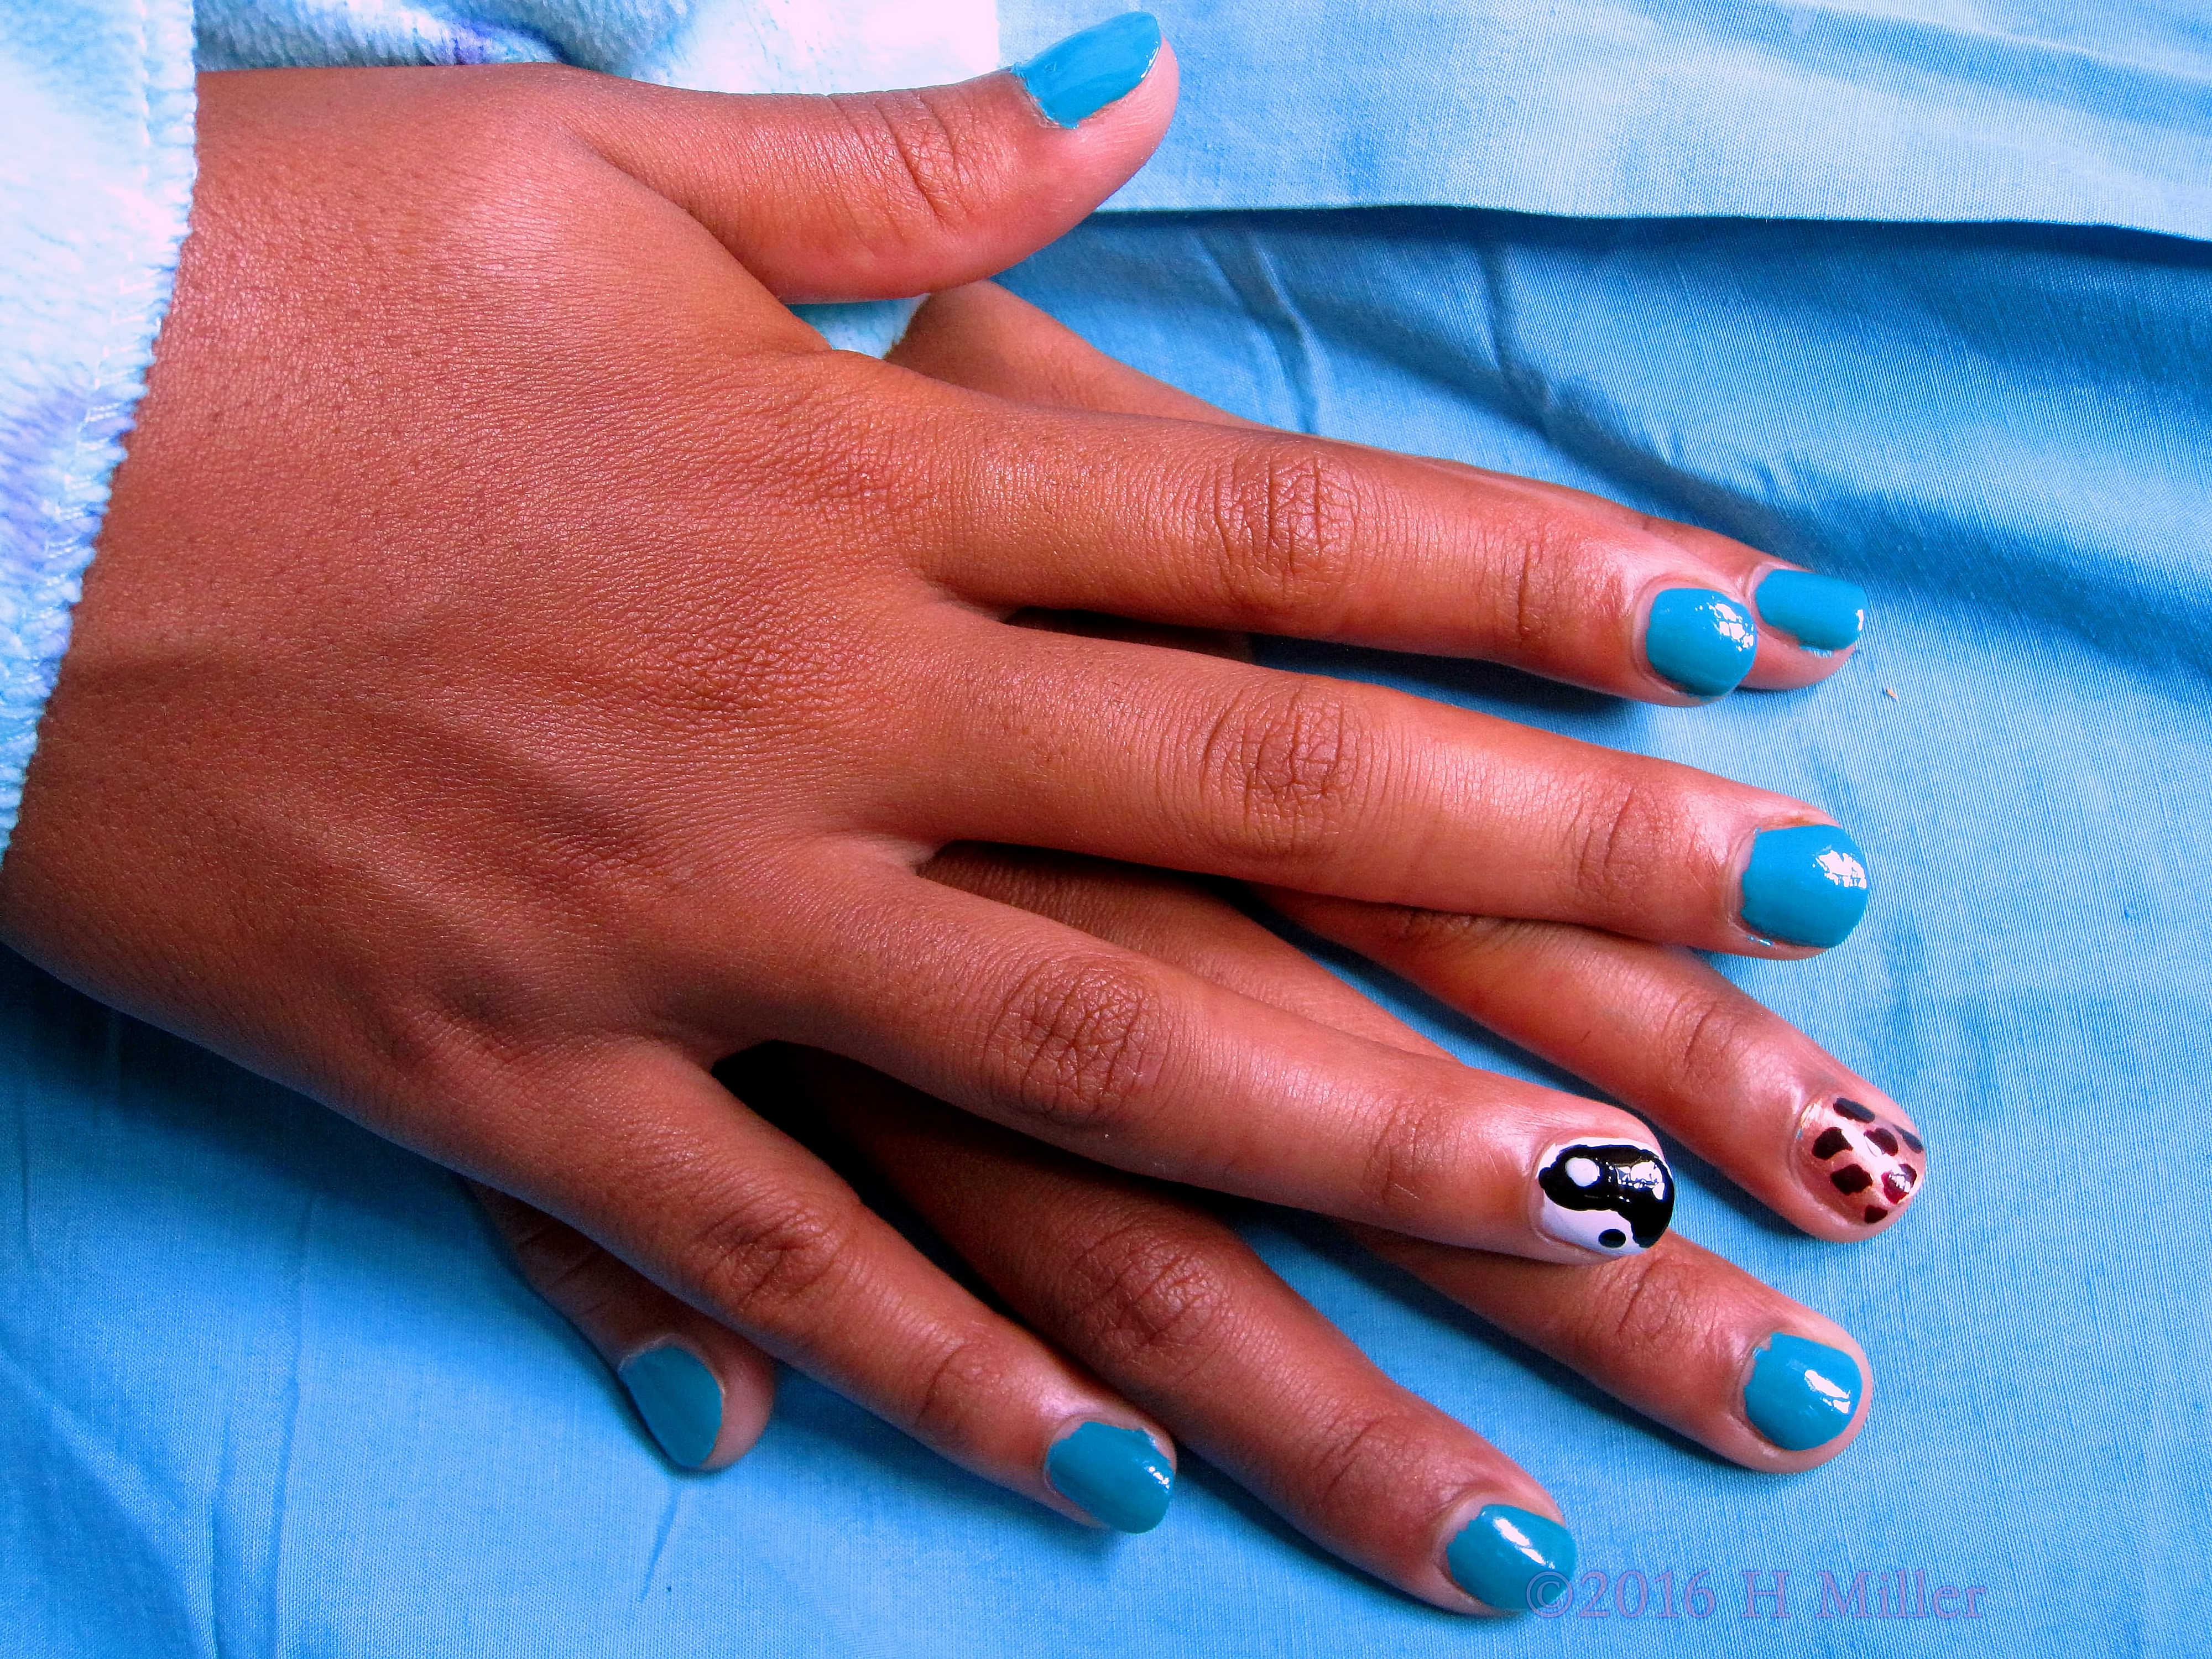 Awesome Ying Yang And Pink Leopard Girls Spa Manicure